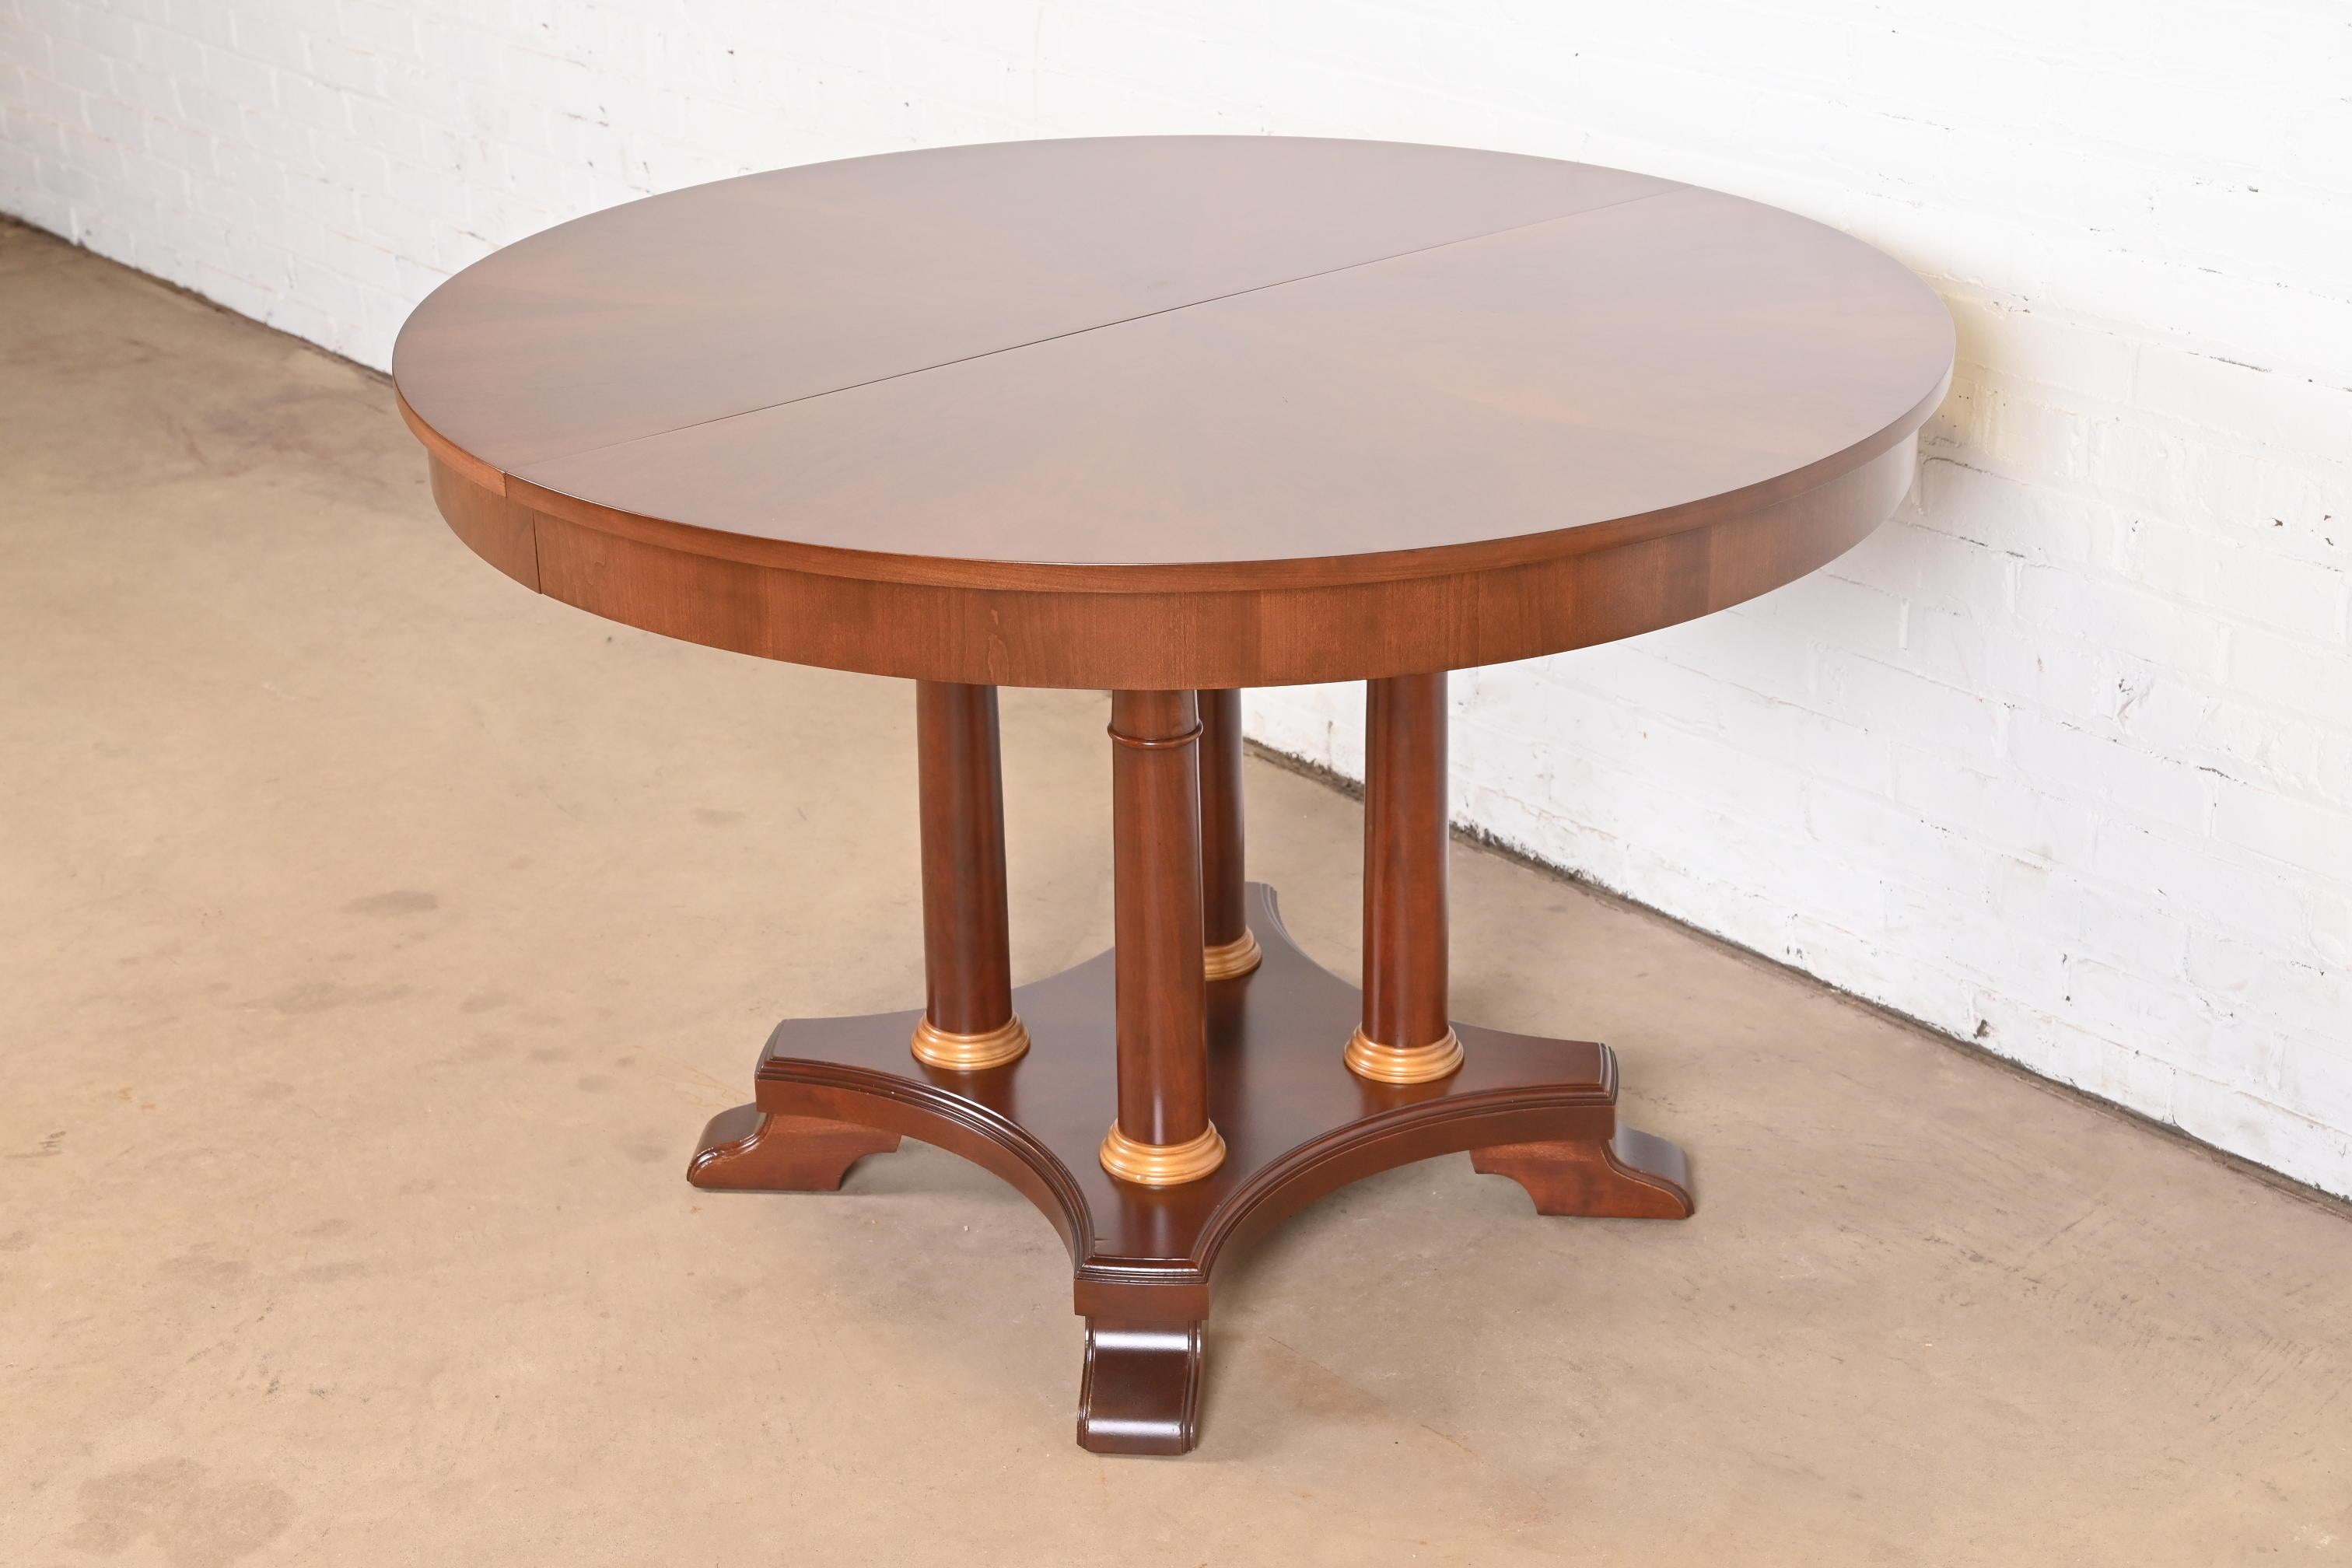 Neoclassical or Empire Cherry Wood Pedestal Dining Table, Newly Refinished For Sale 8